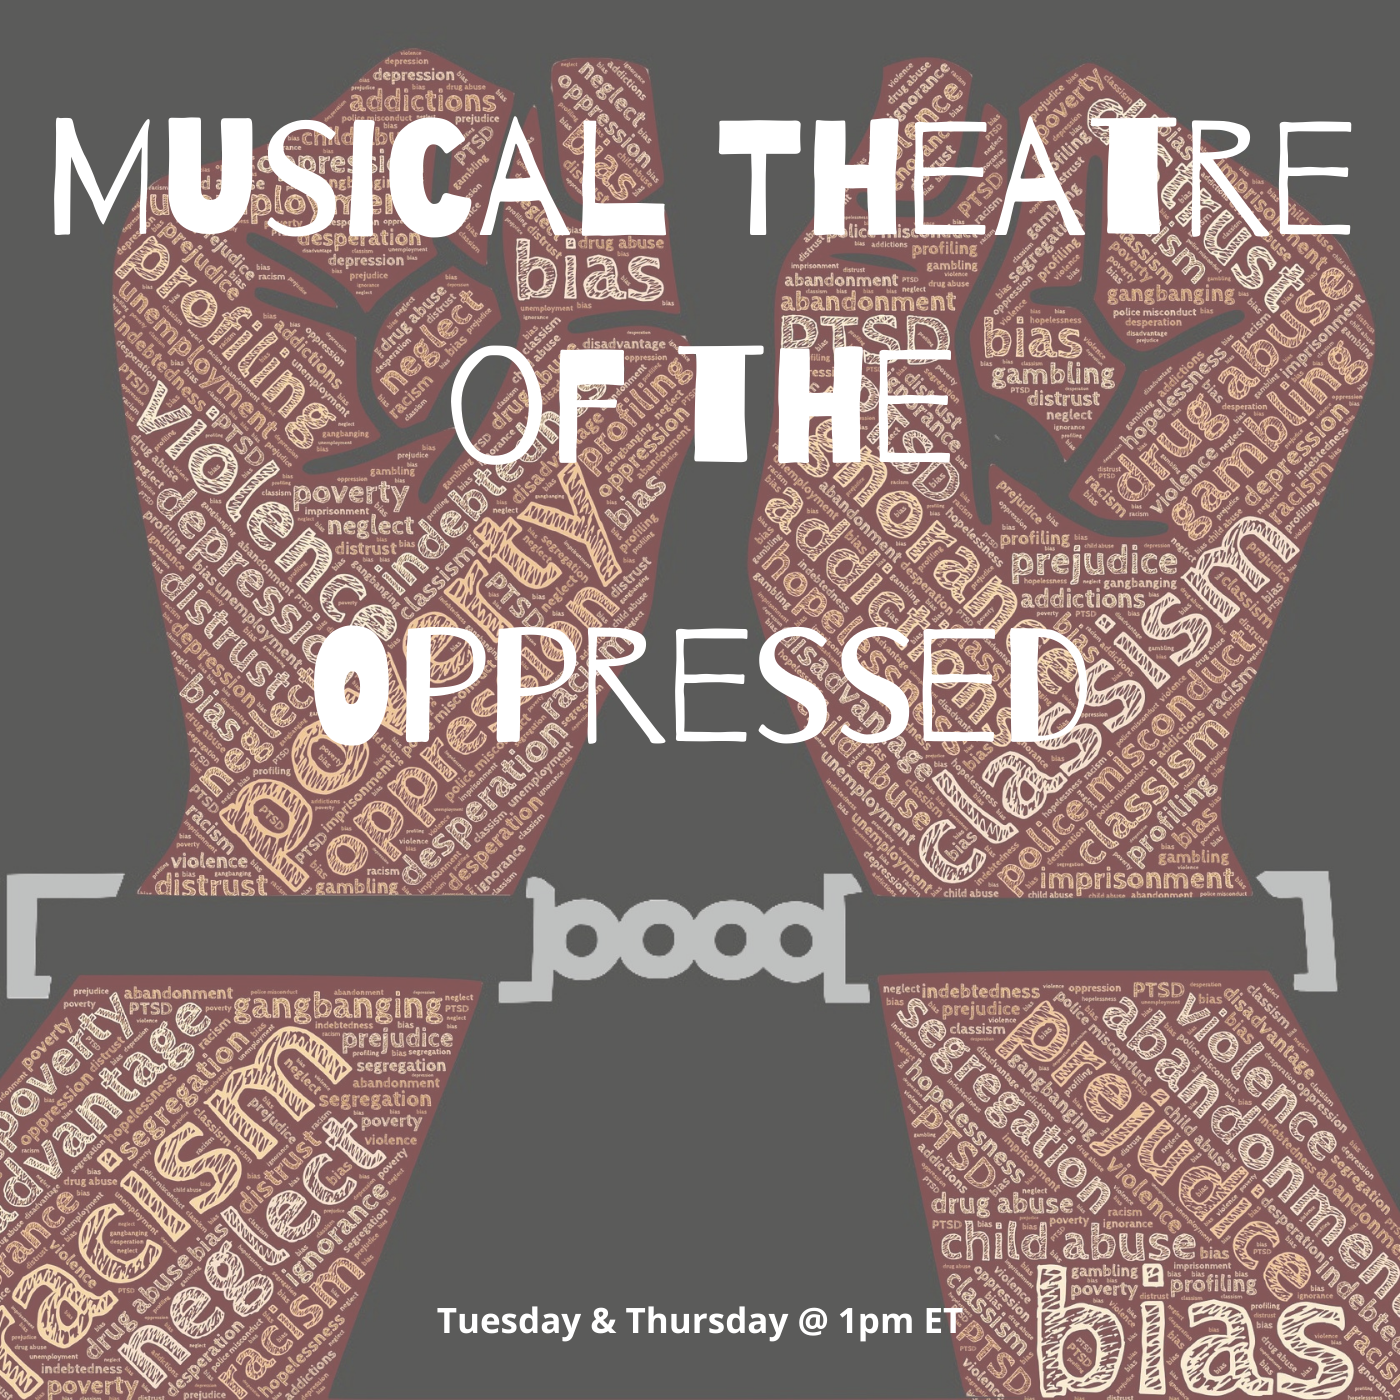 Art for Tune in to Musical Theatre of the Oppressed by Musical Theatre Radio